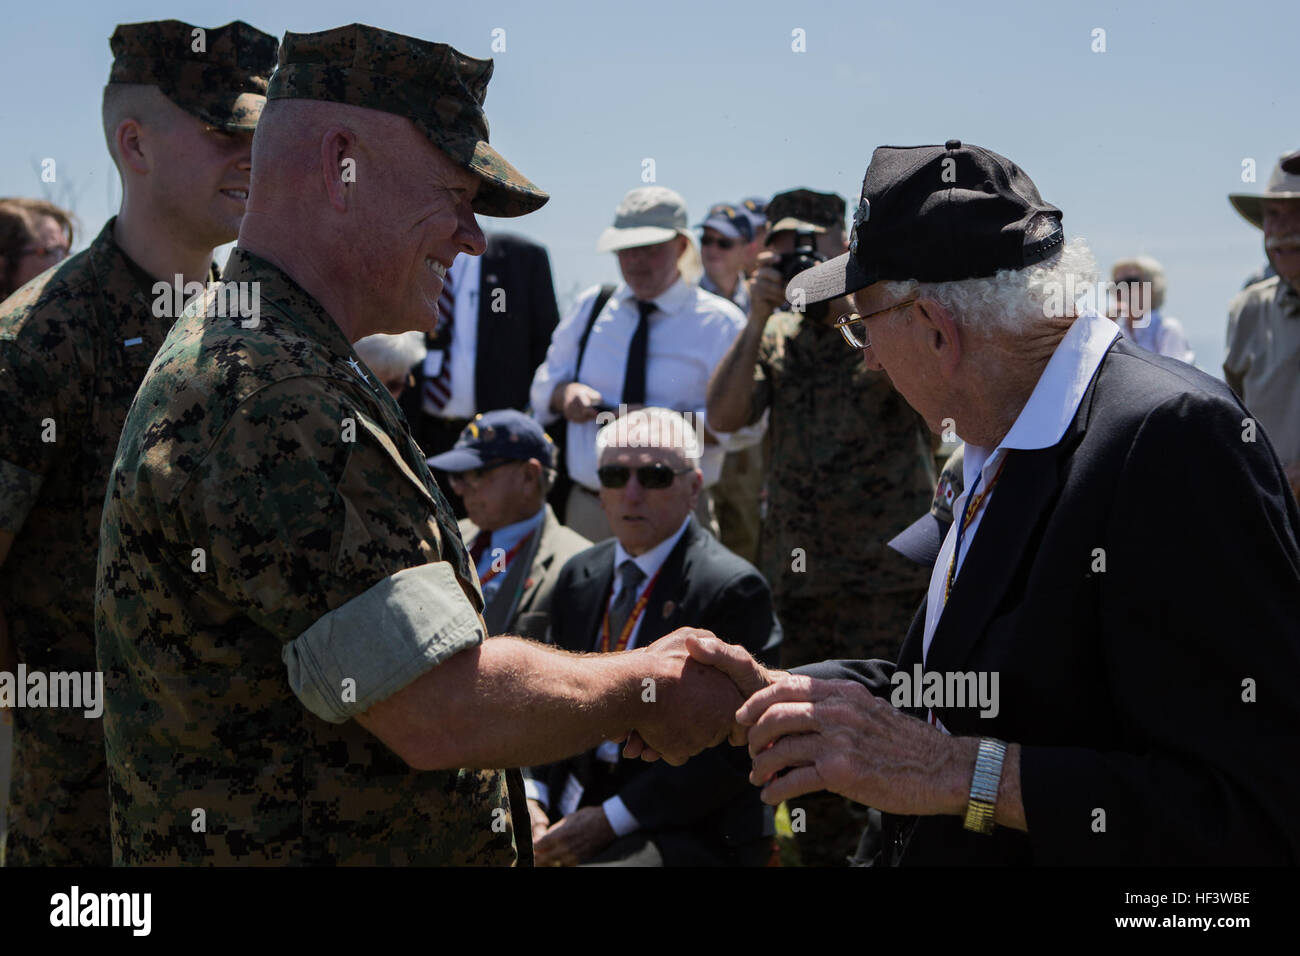 U.S. Marine Corps Lt. Gen. Larry D. Nicholson, left, commanding general, III Marine Expeditionary Force, shakes hands with John Jack Lizere, a U.S. Marine Corps veteran of the Battle of Iwo Jima, during the 71st Commemoration of the Battle of Iwo Jima at Iwo To, Japan, March 19, 2016. The Iwo Jima Reunion of Honor is an opportunity for Japanese and U.S. veterans and their families, dignitaries, leaders and service members from both nations to honor the battle while recognizing 71 years of peace and prosperity in the U.S. – Japanese alliance. (U.S. Marine Corps photo by MCIPAC Combat Camera Lan Stock Photo